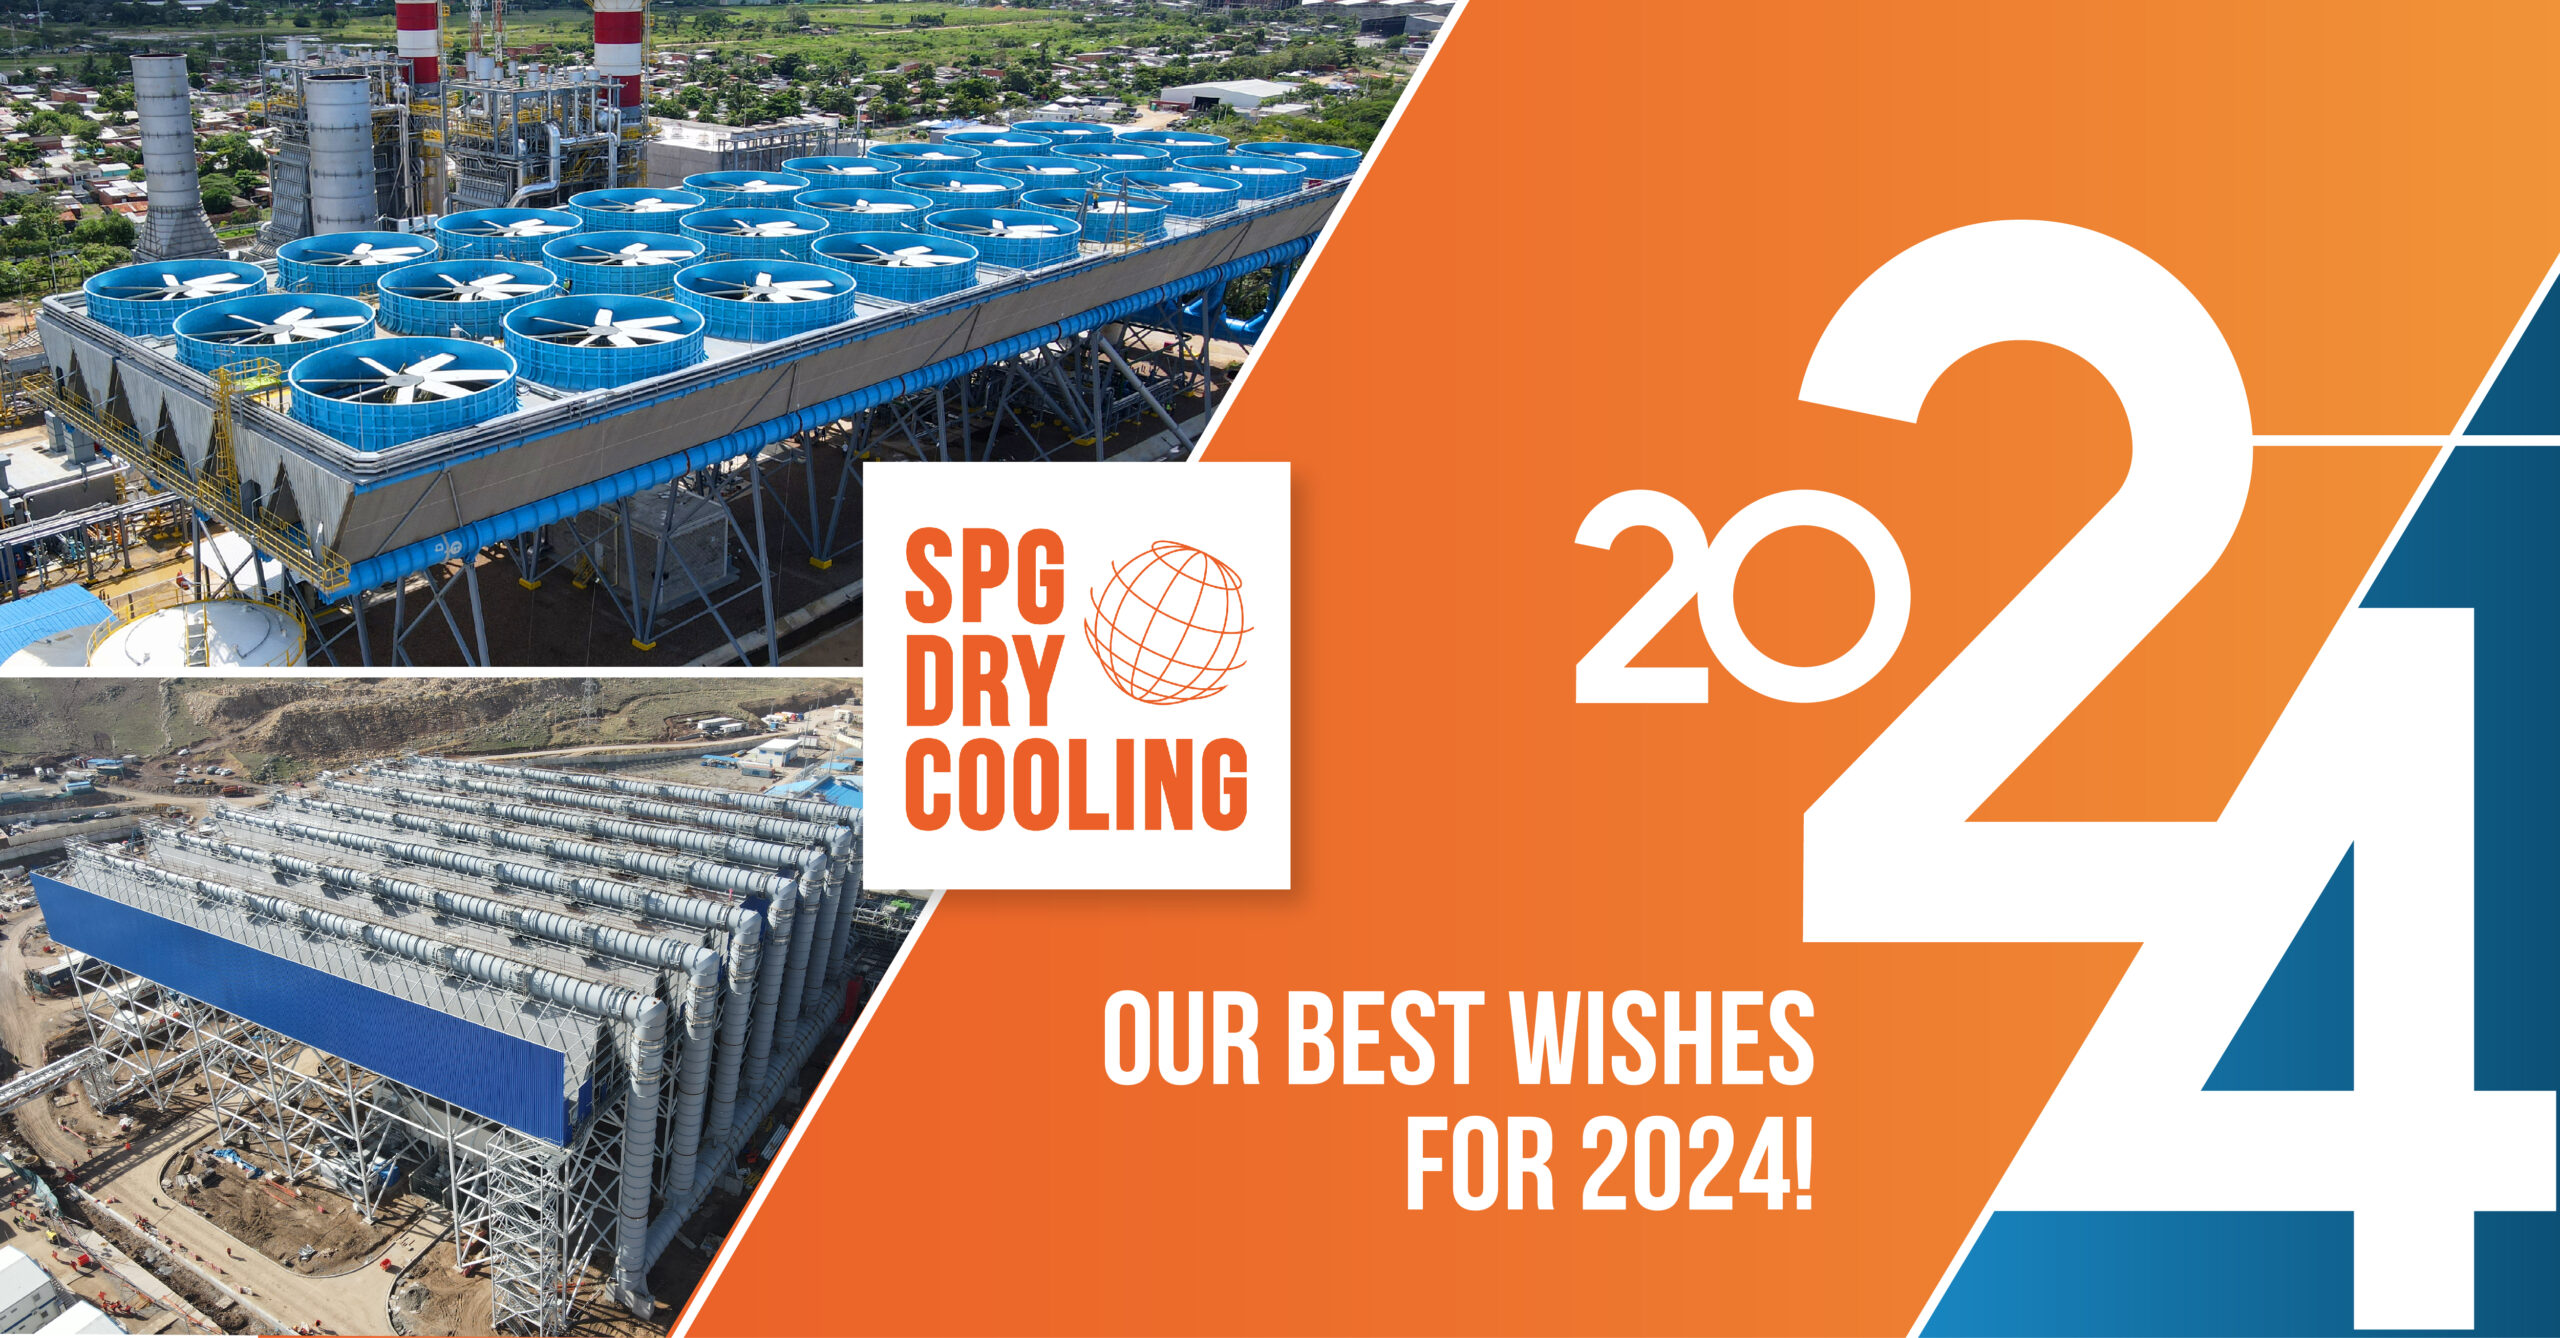 Best wishes for 2024 from us to you! SPG Dry Cooling